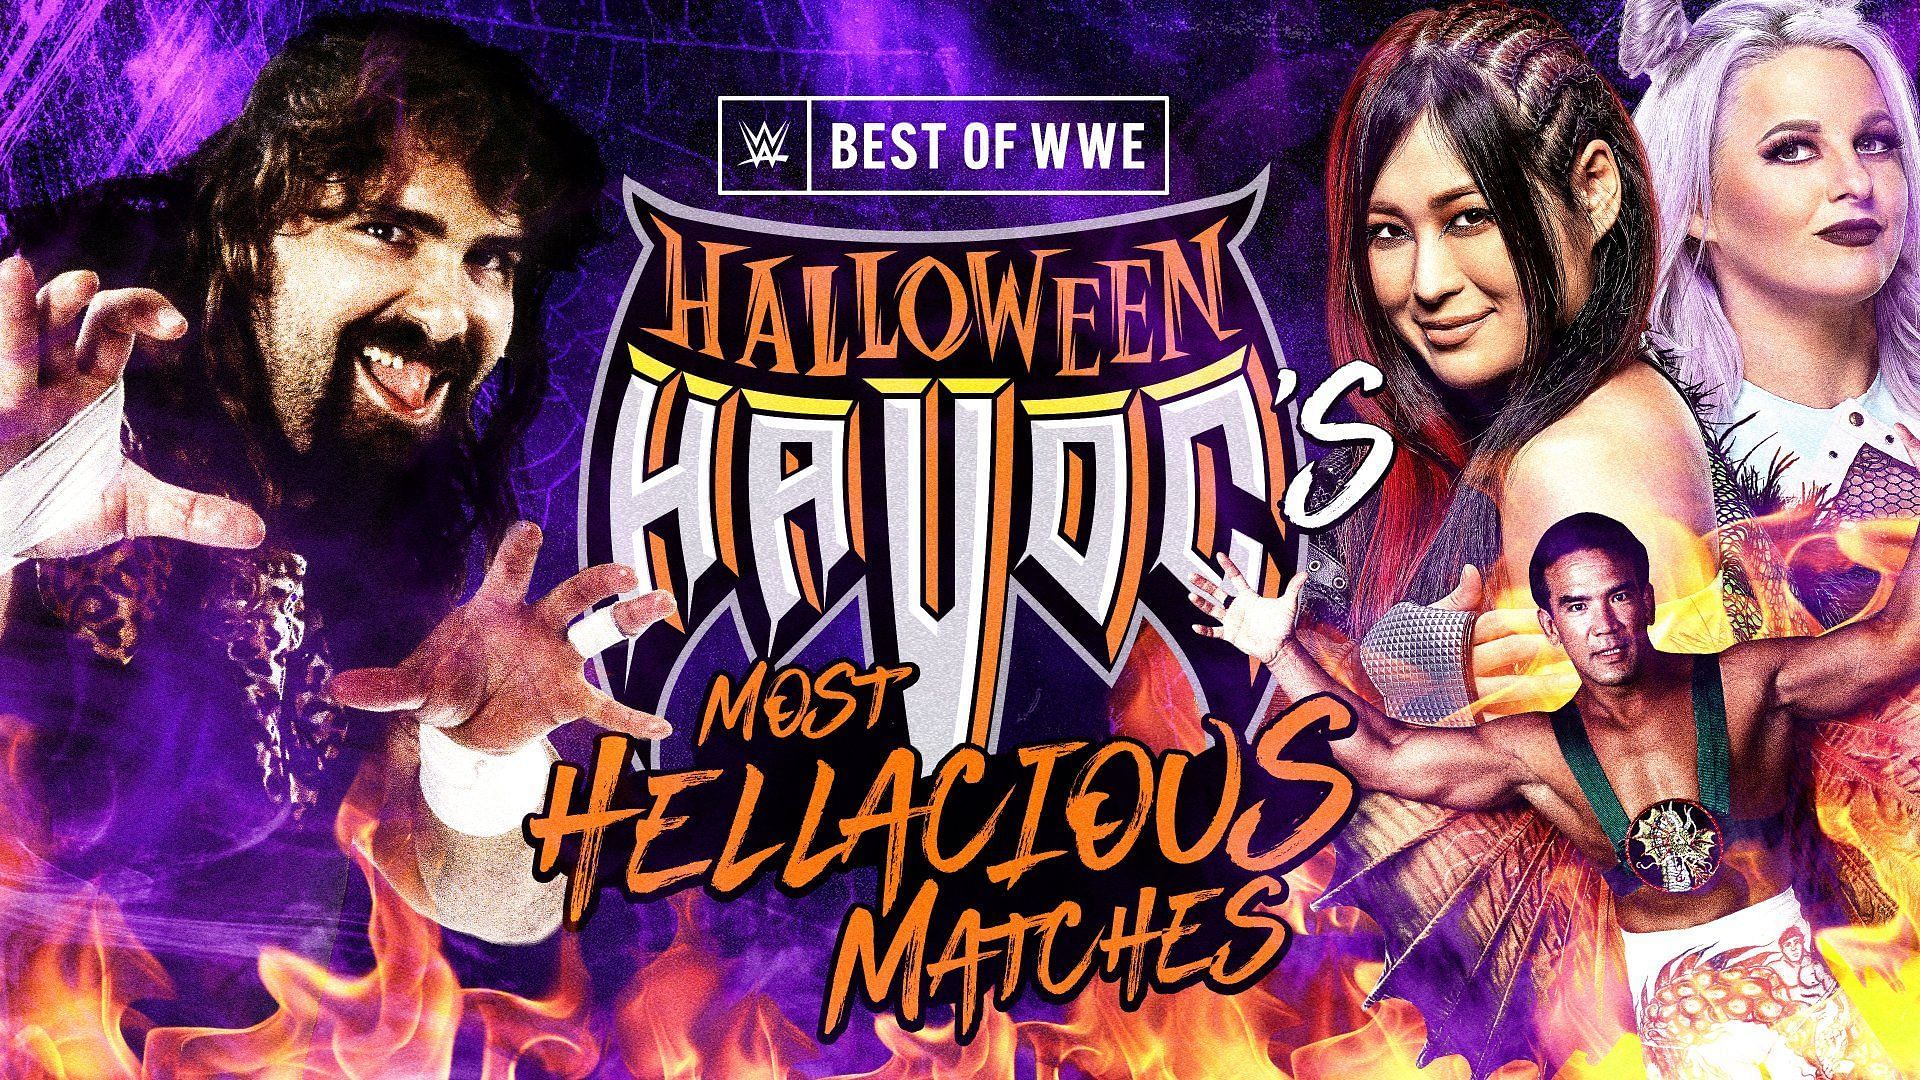 The Best Of WWE: Halloween Havoc&#039;s Most Hellacious Matches graphic